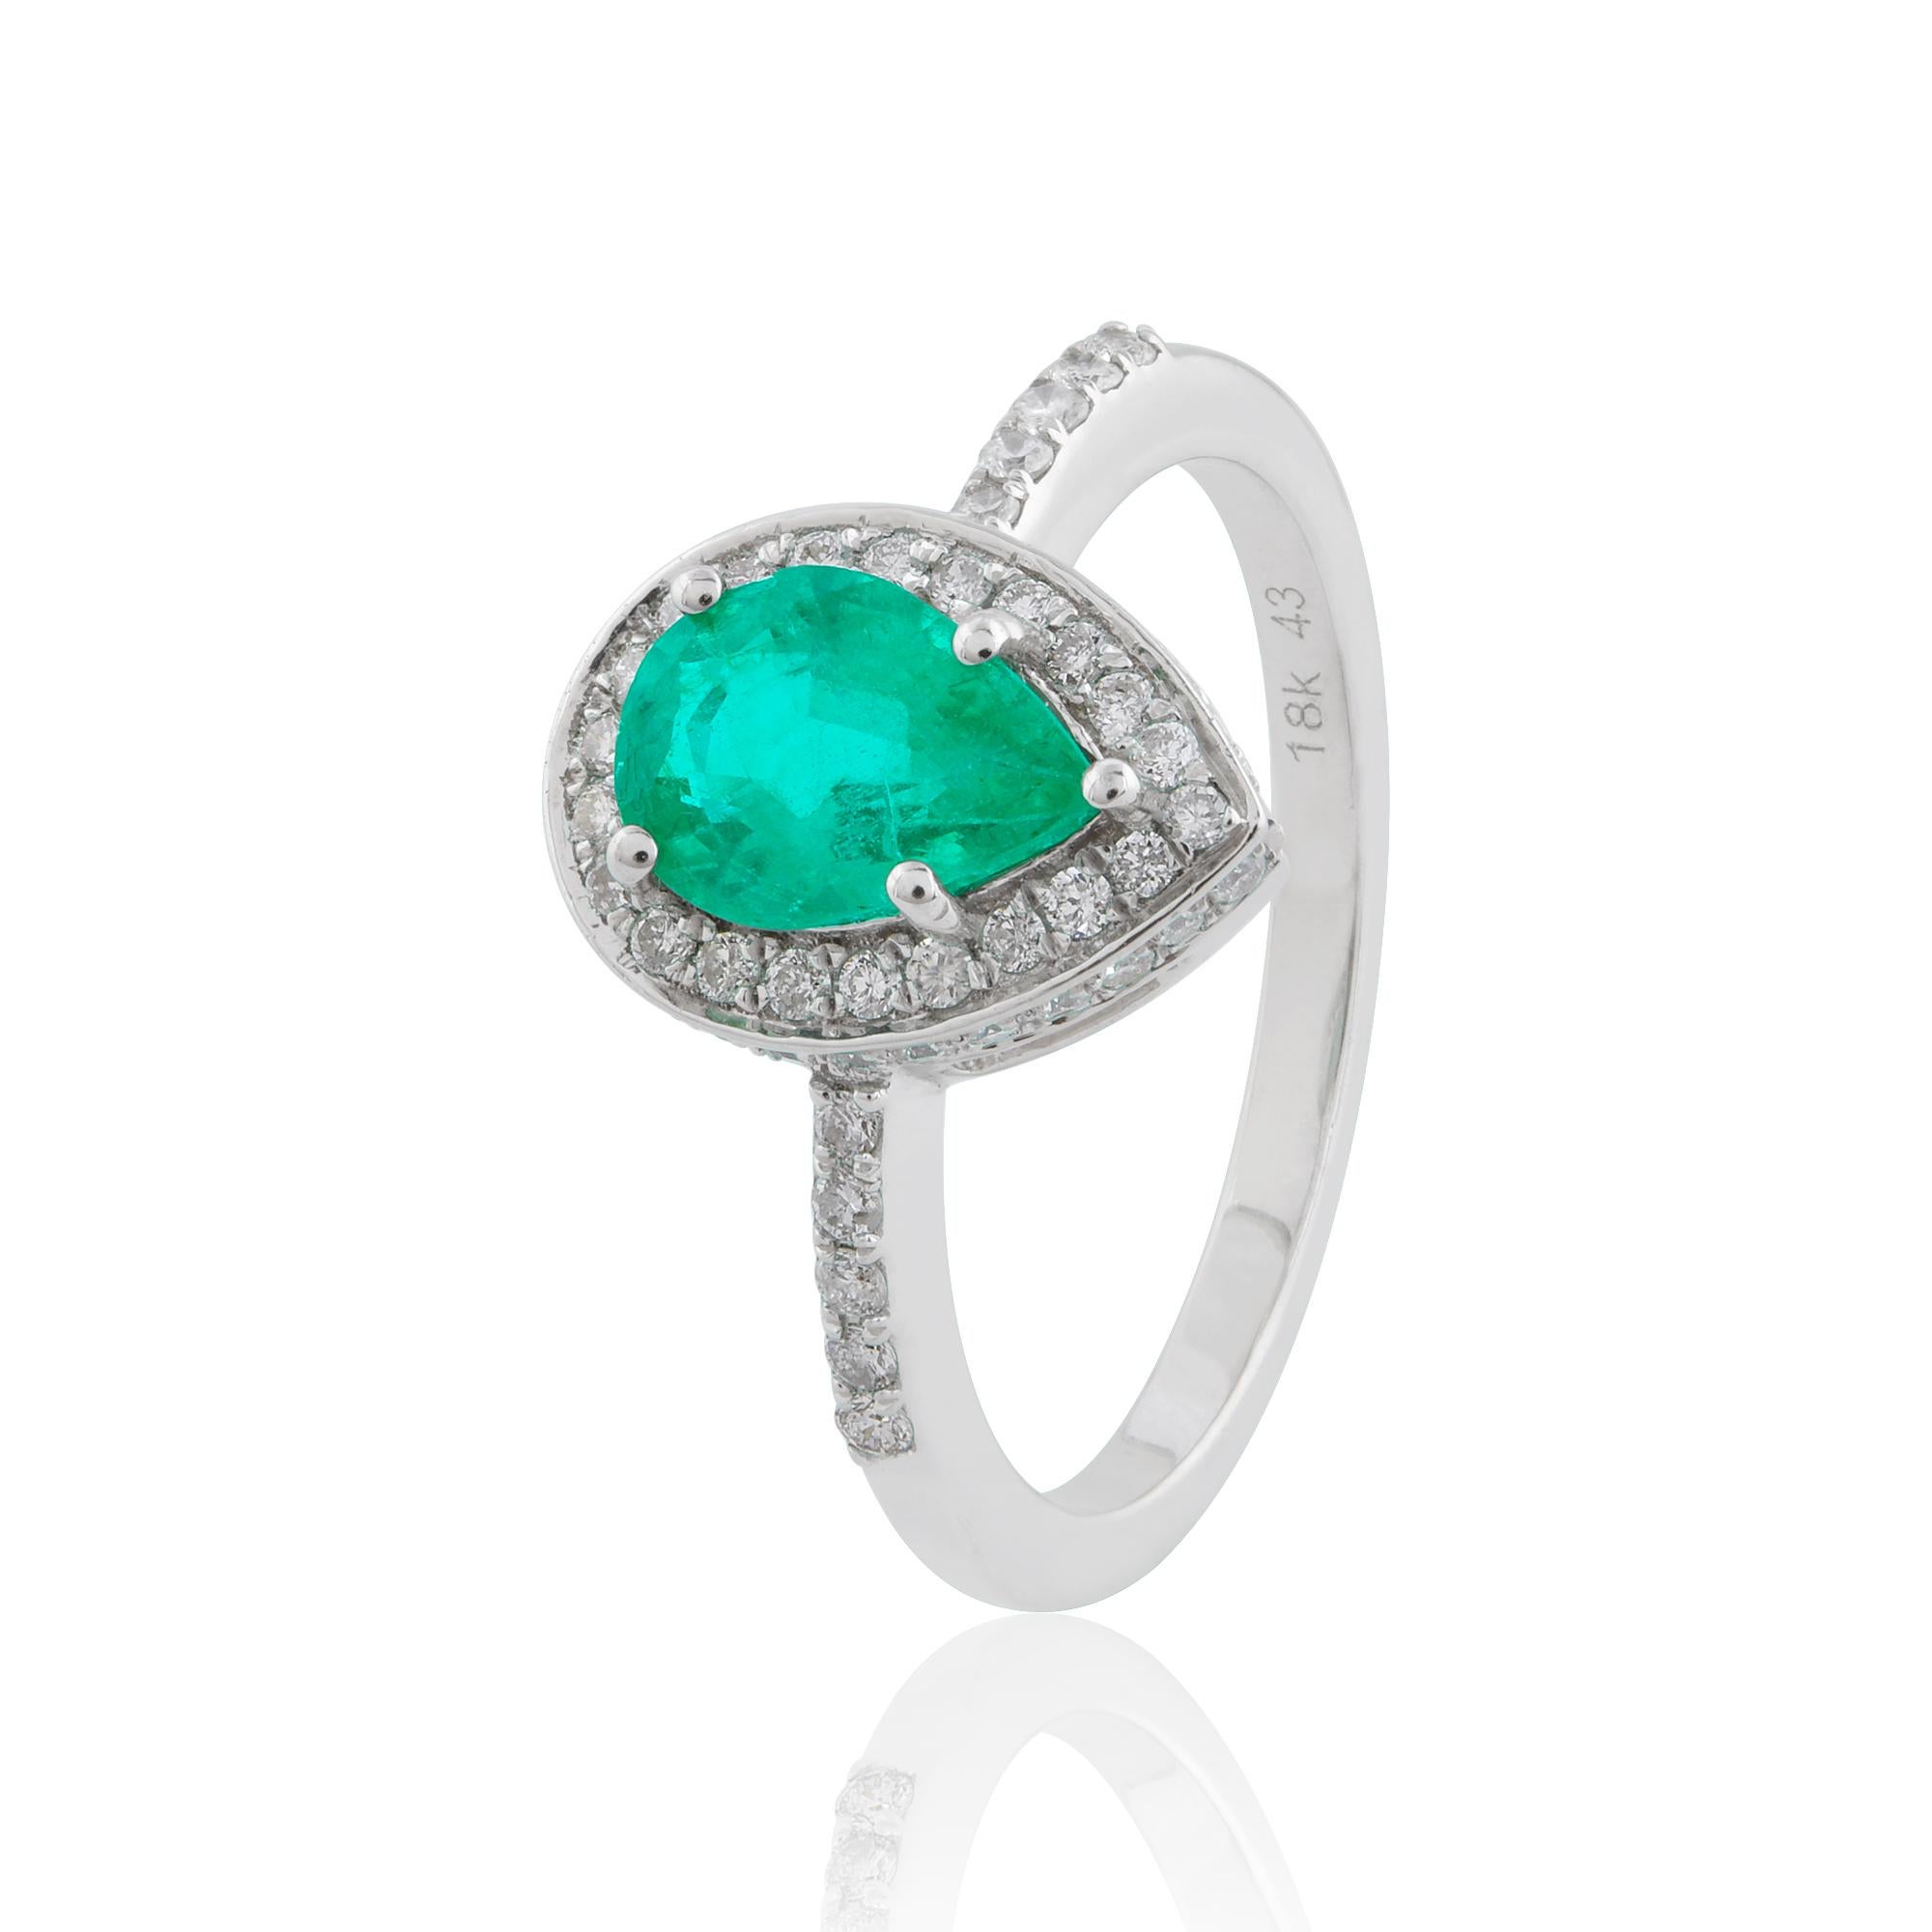 Women's 1.40 Tcw Pear Natural Emerald Gemstone Halo Ring Diamond 18k White Gold Jewelry For Sale